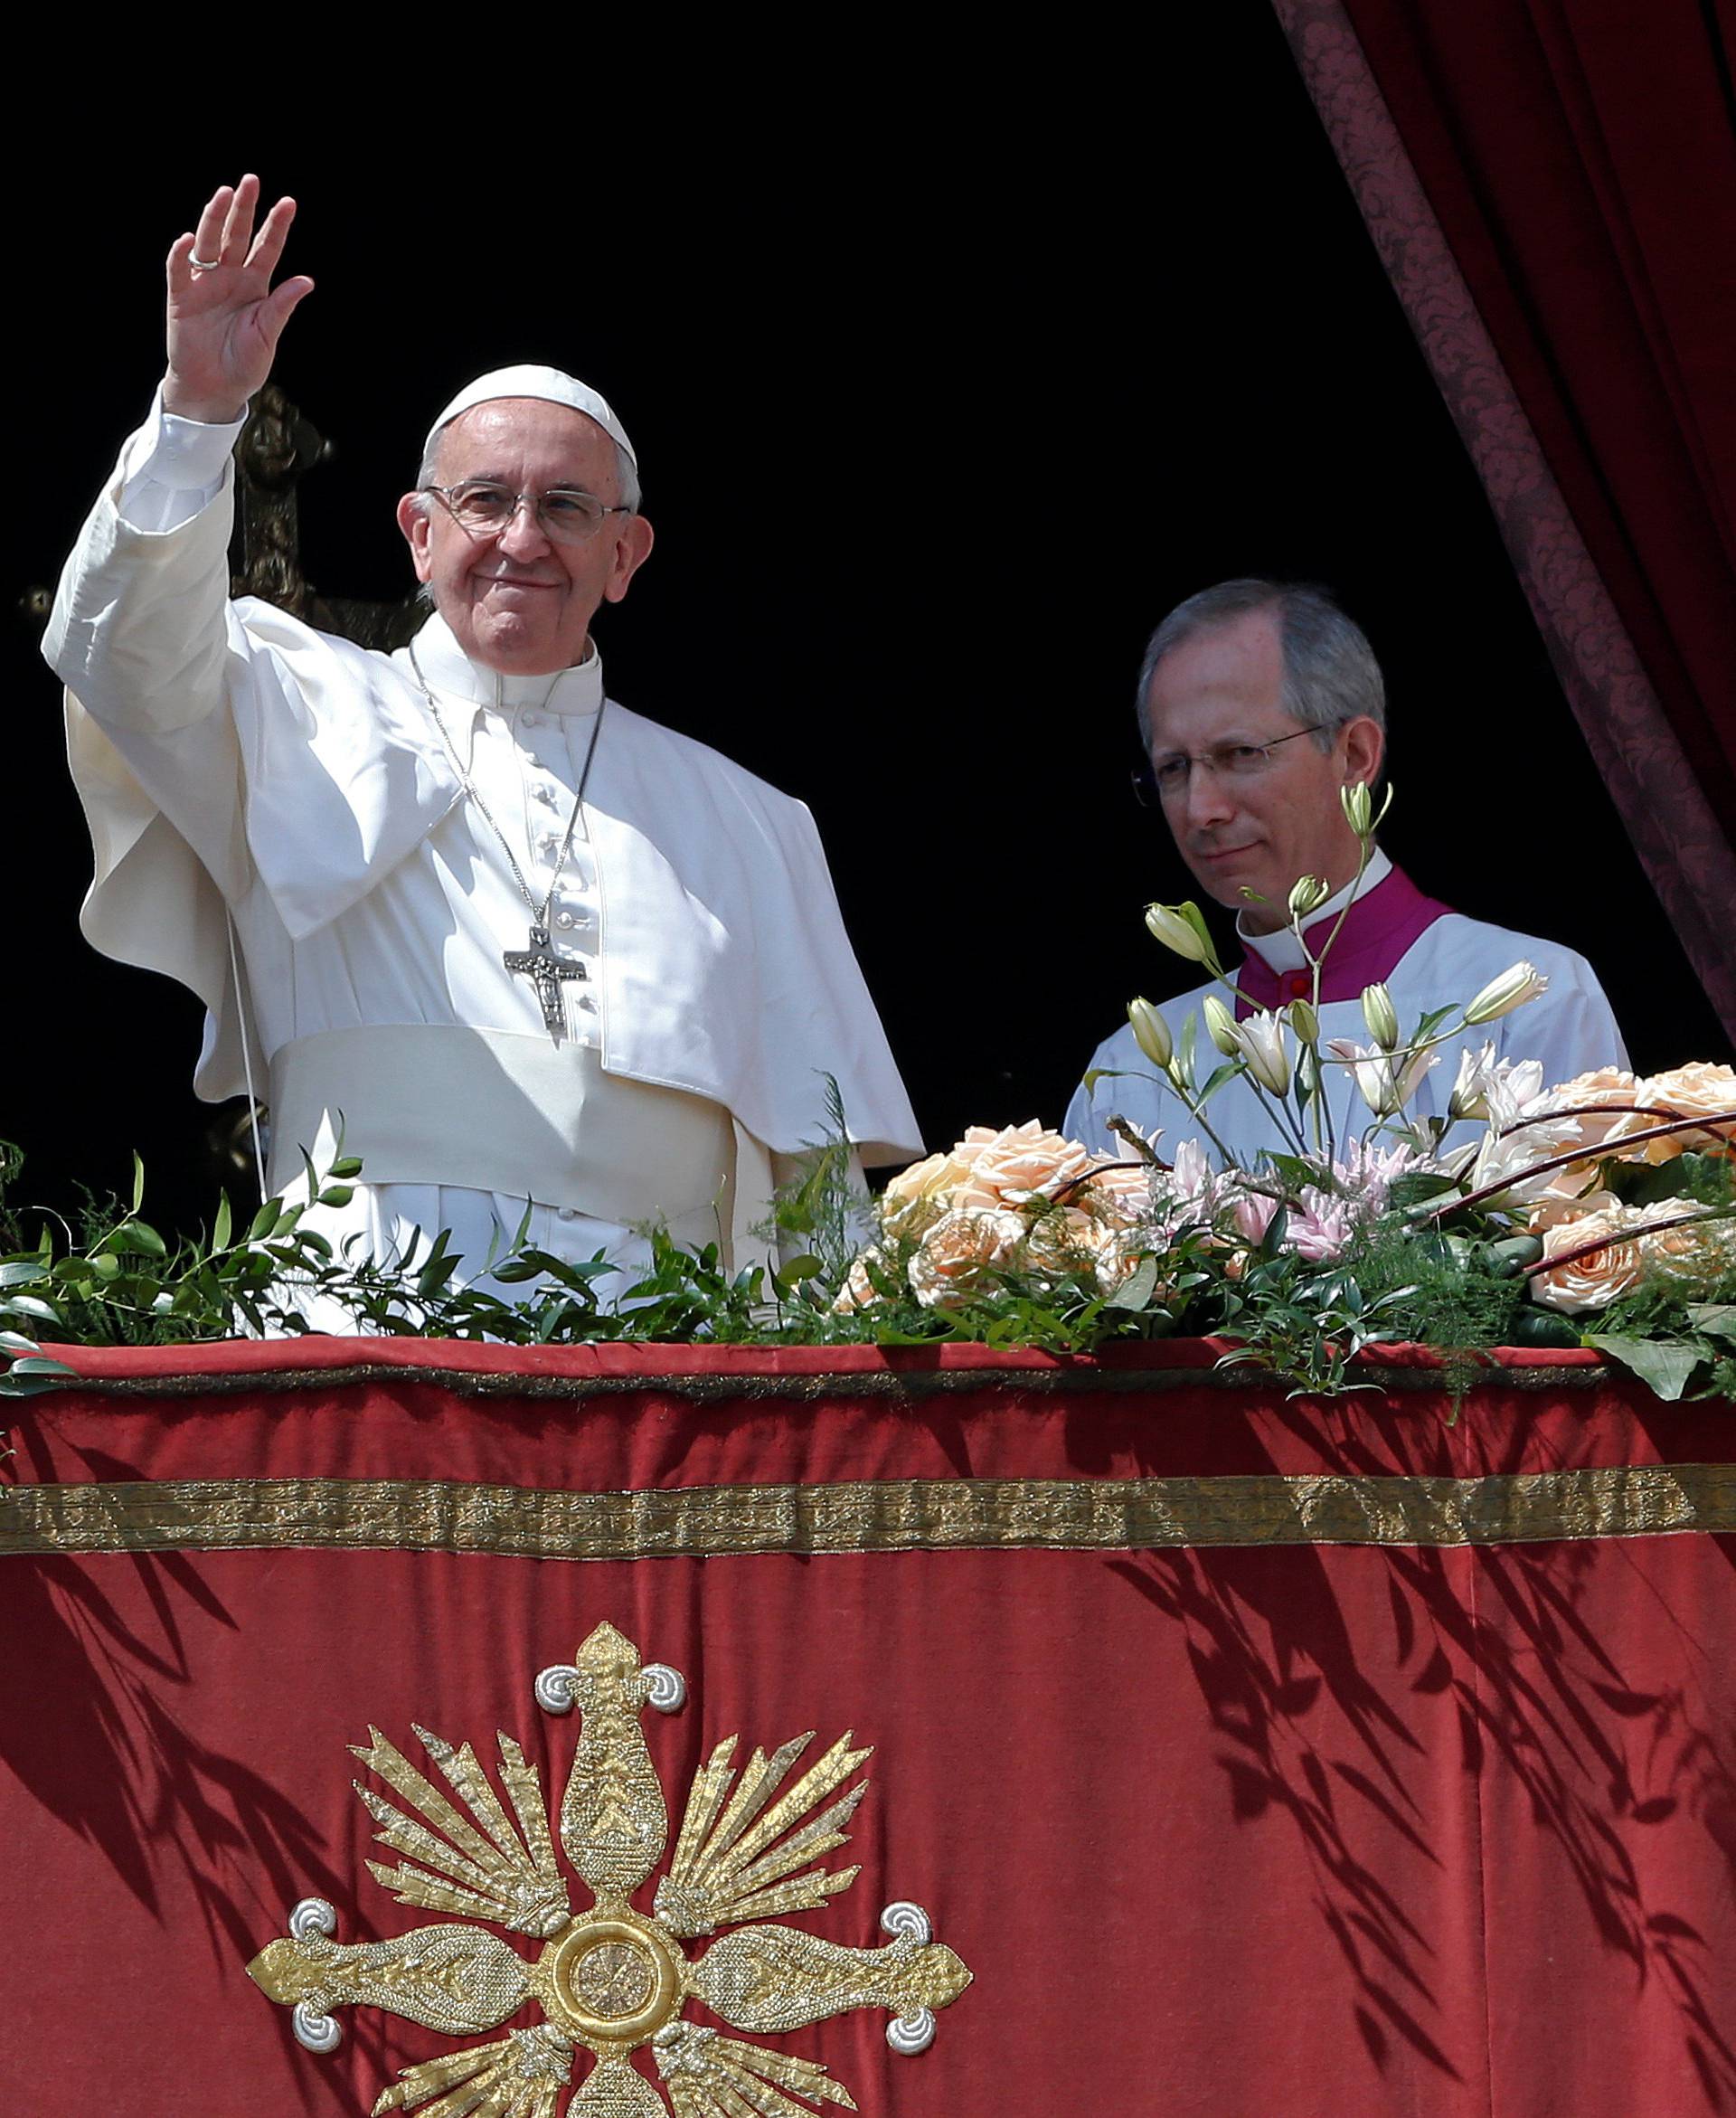 Pope Francis waves at the end of his "Urbi et Orbi" (to the city and the world) message from the balcony overlooking St. Peter's Square at the Vatican